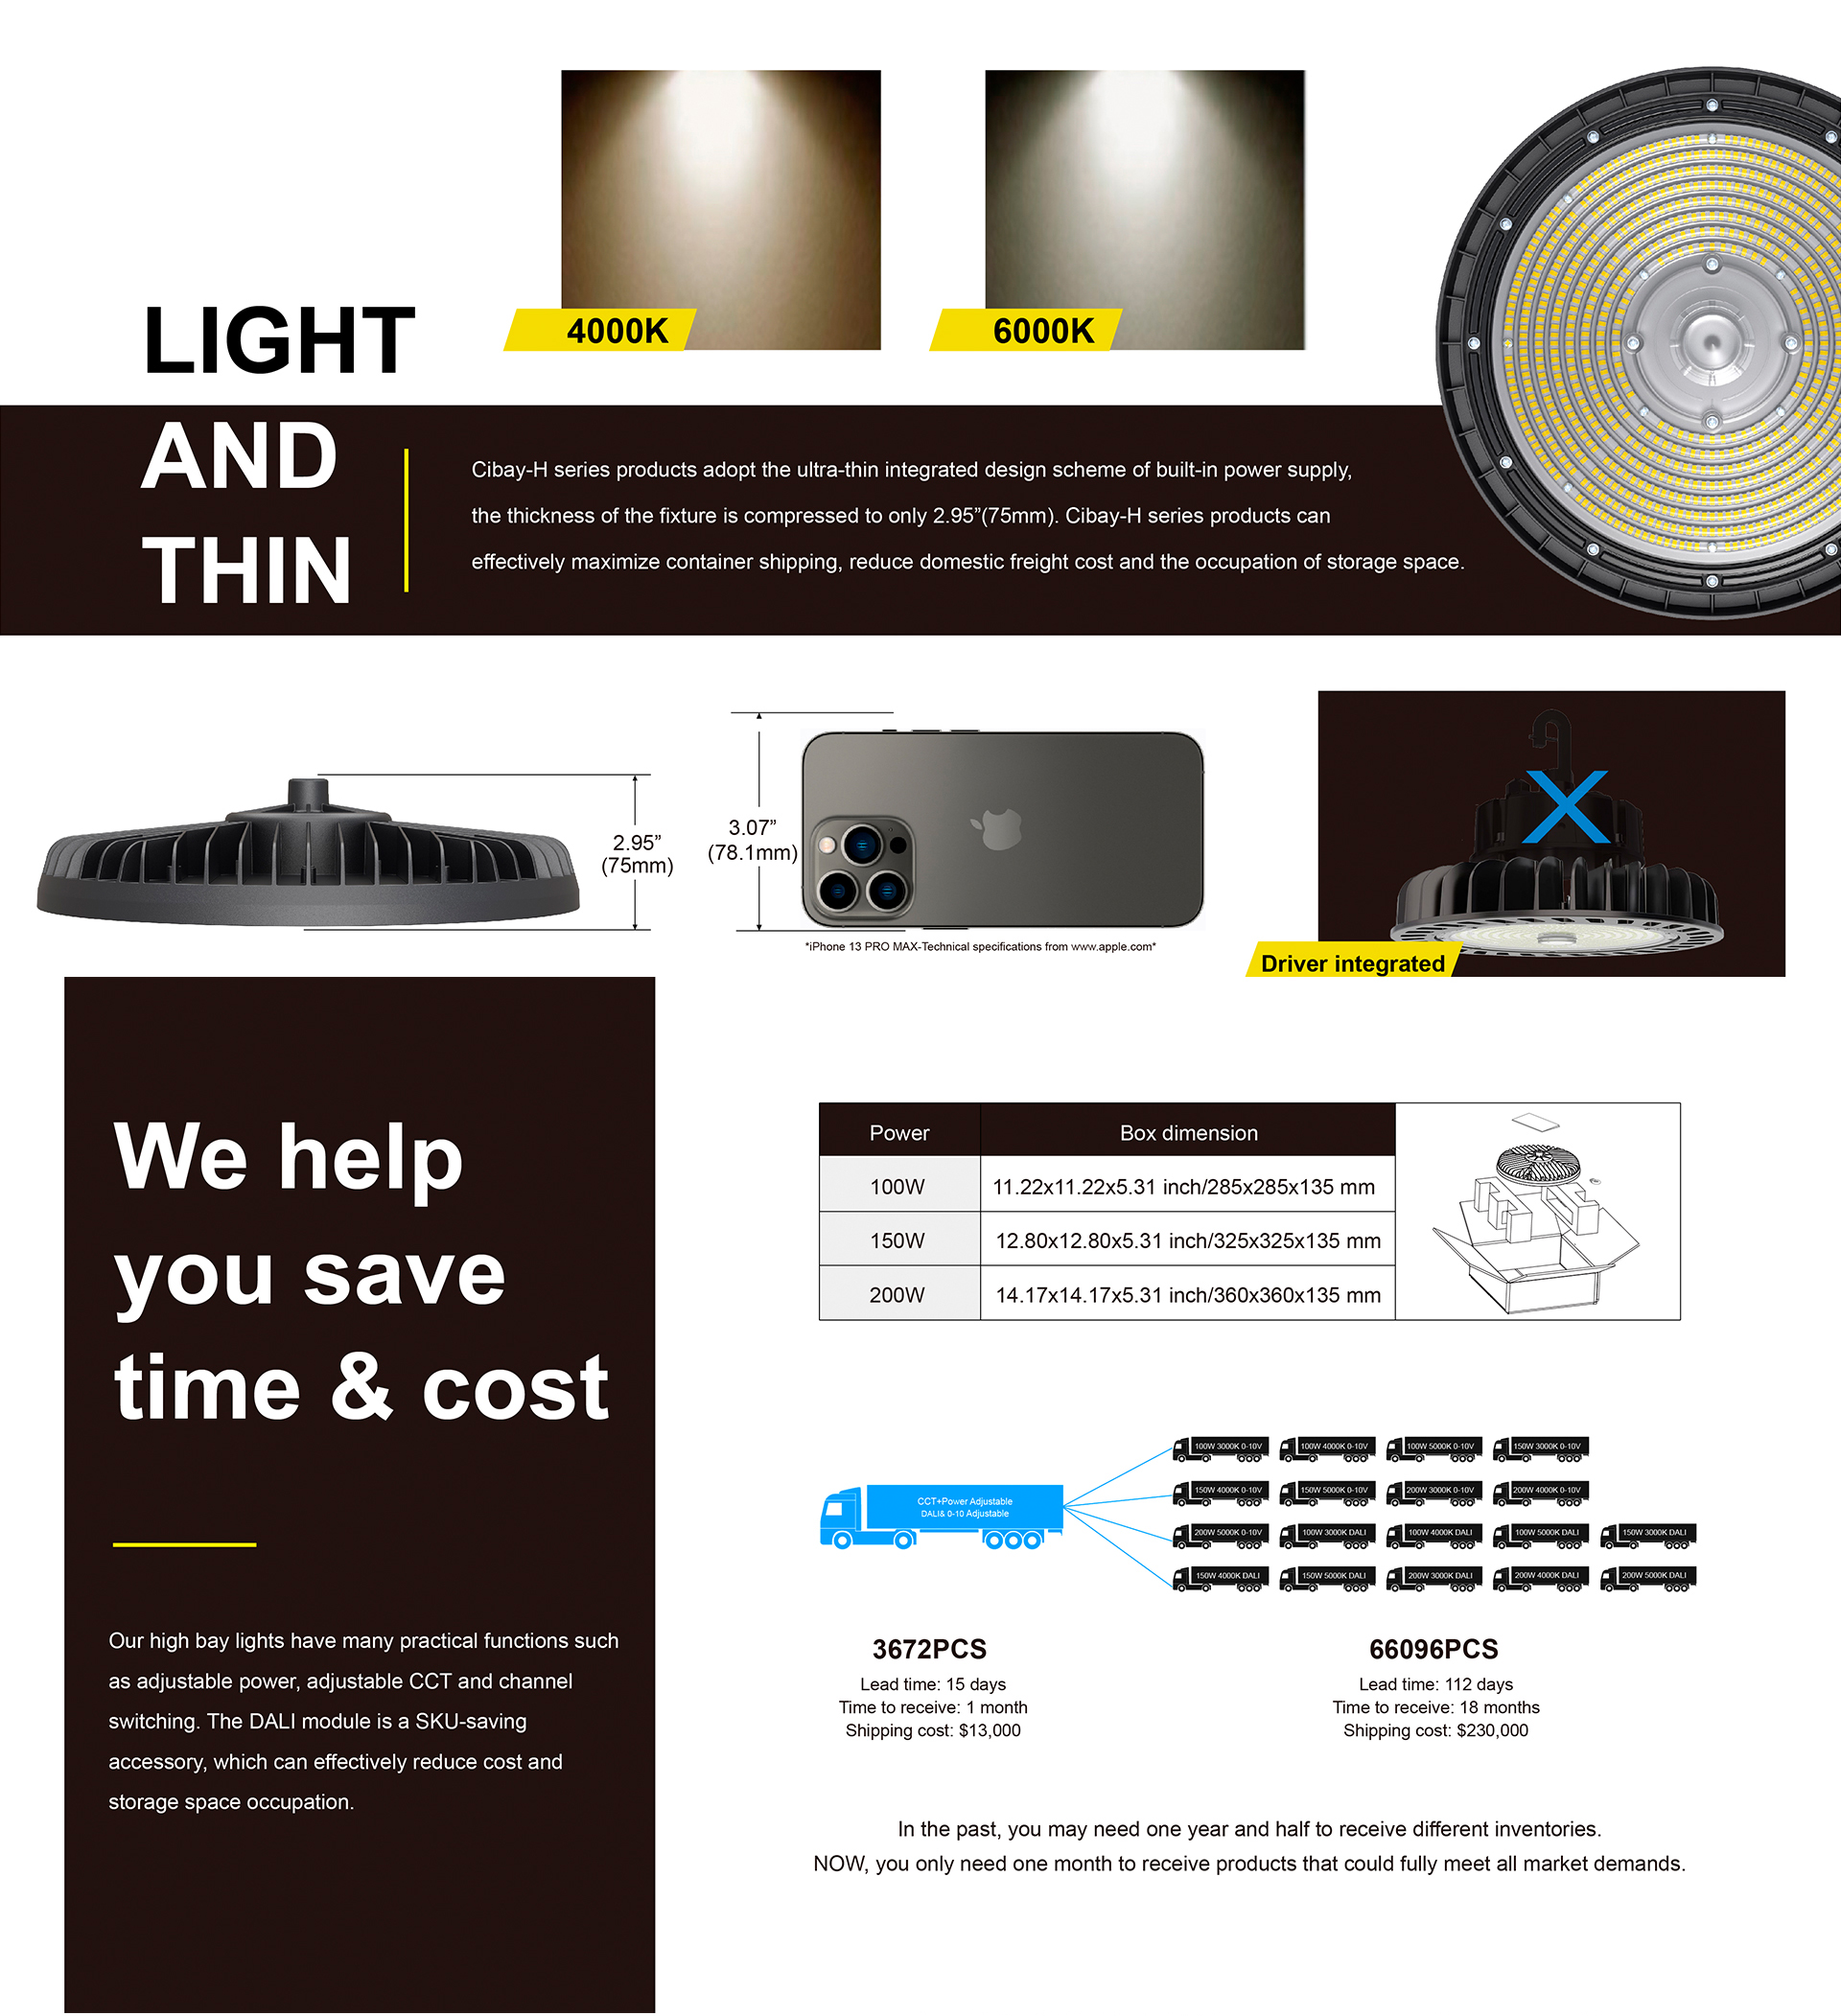 Highbay light save time & cost